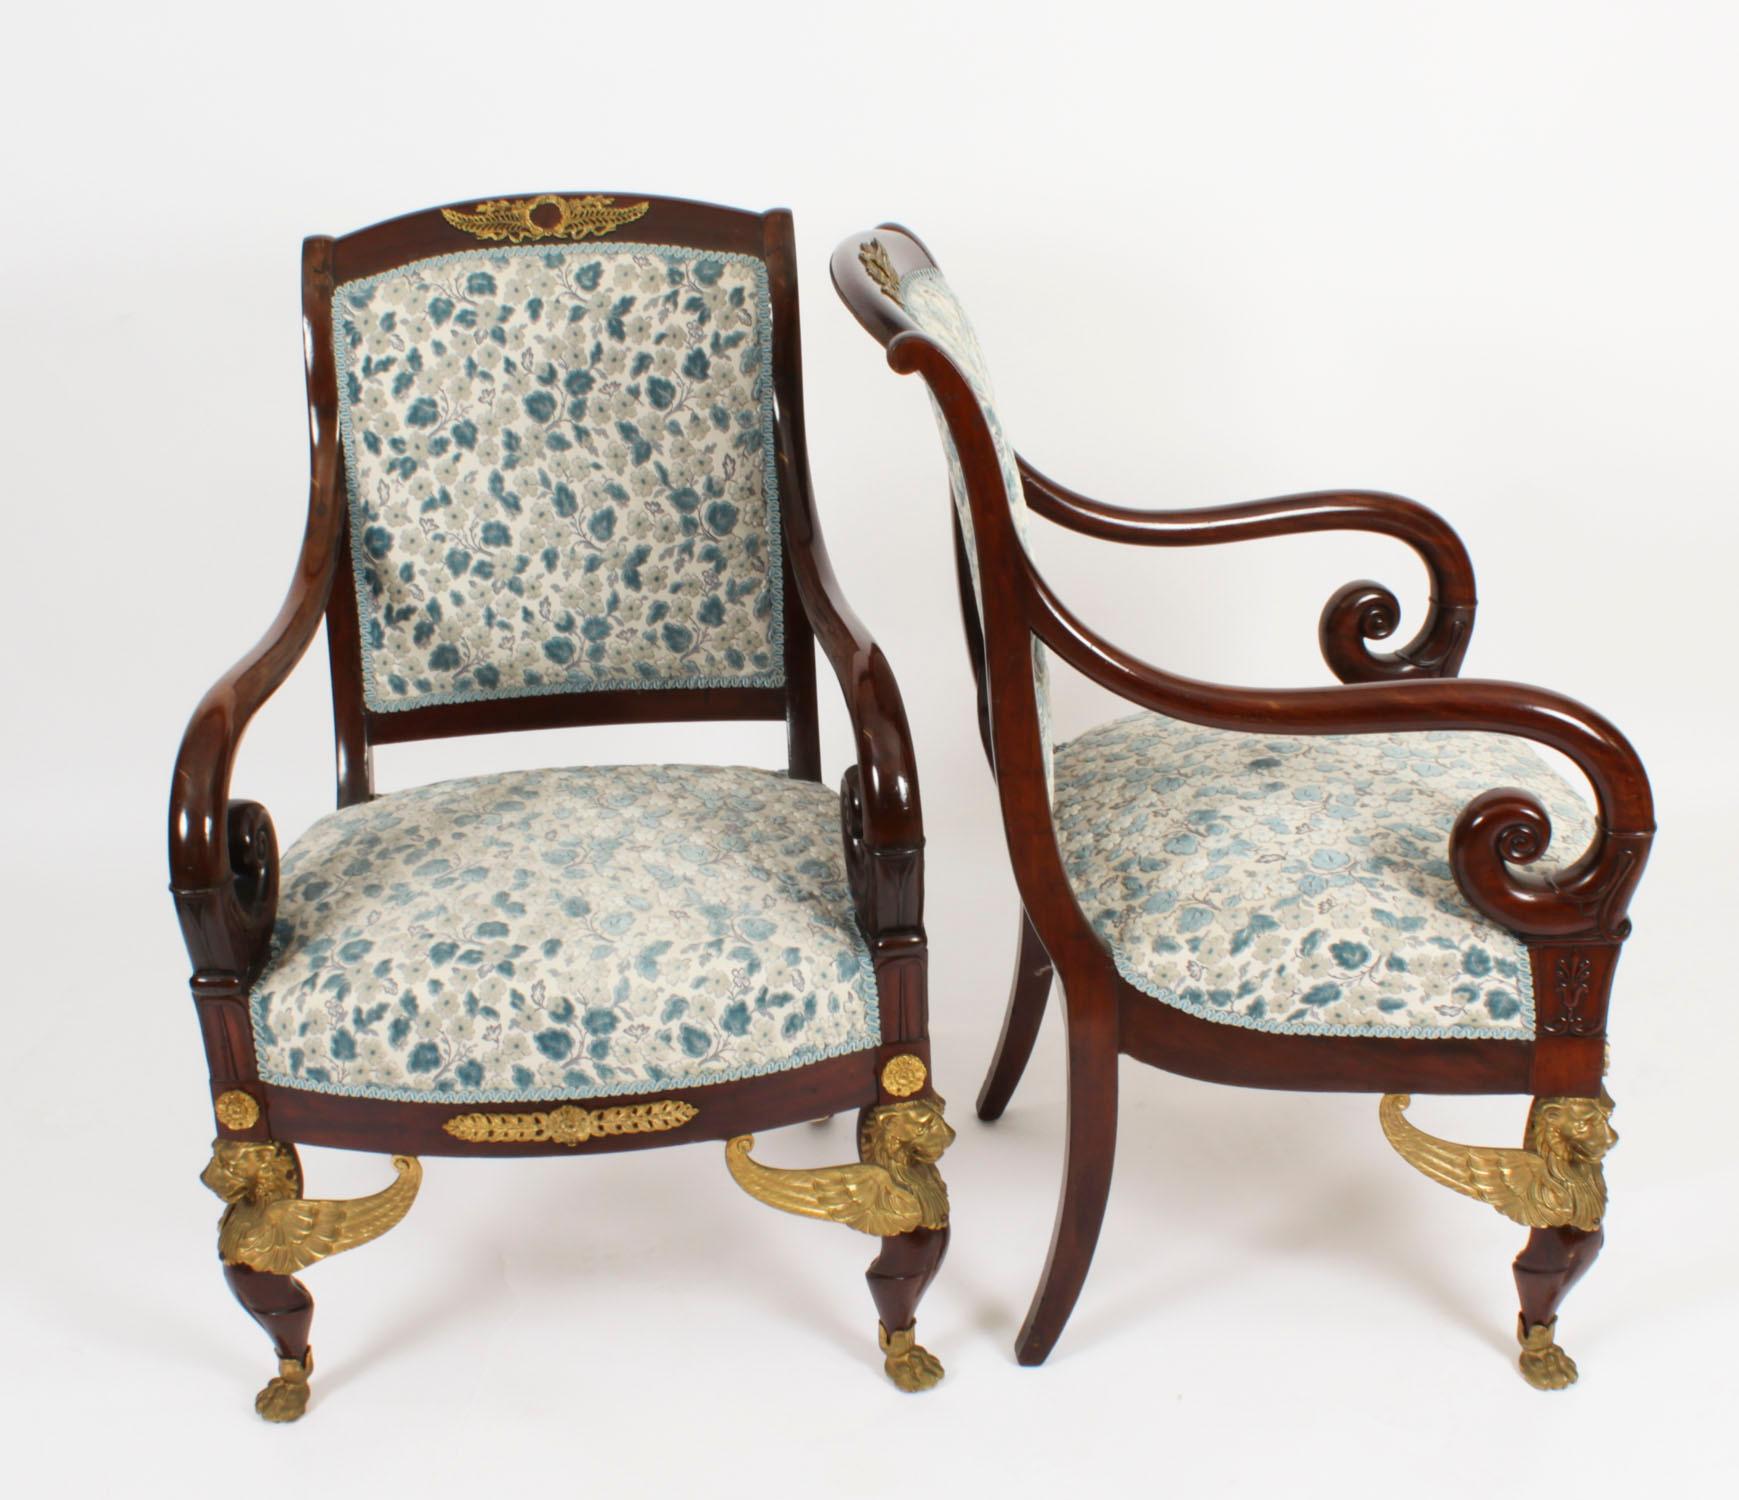 This is a fantastic and highly decorative antique pair of French ormolu mounted mahogany Empire fauteuil armchairs,  circa 1870 in date.
They feature scrolled square padded backs mounted with laurel and anthemion ormolu mounts above stuff-over seats